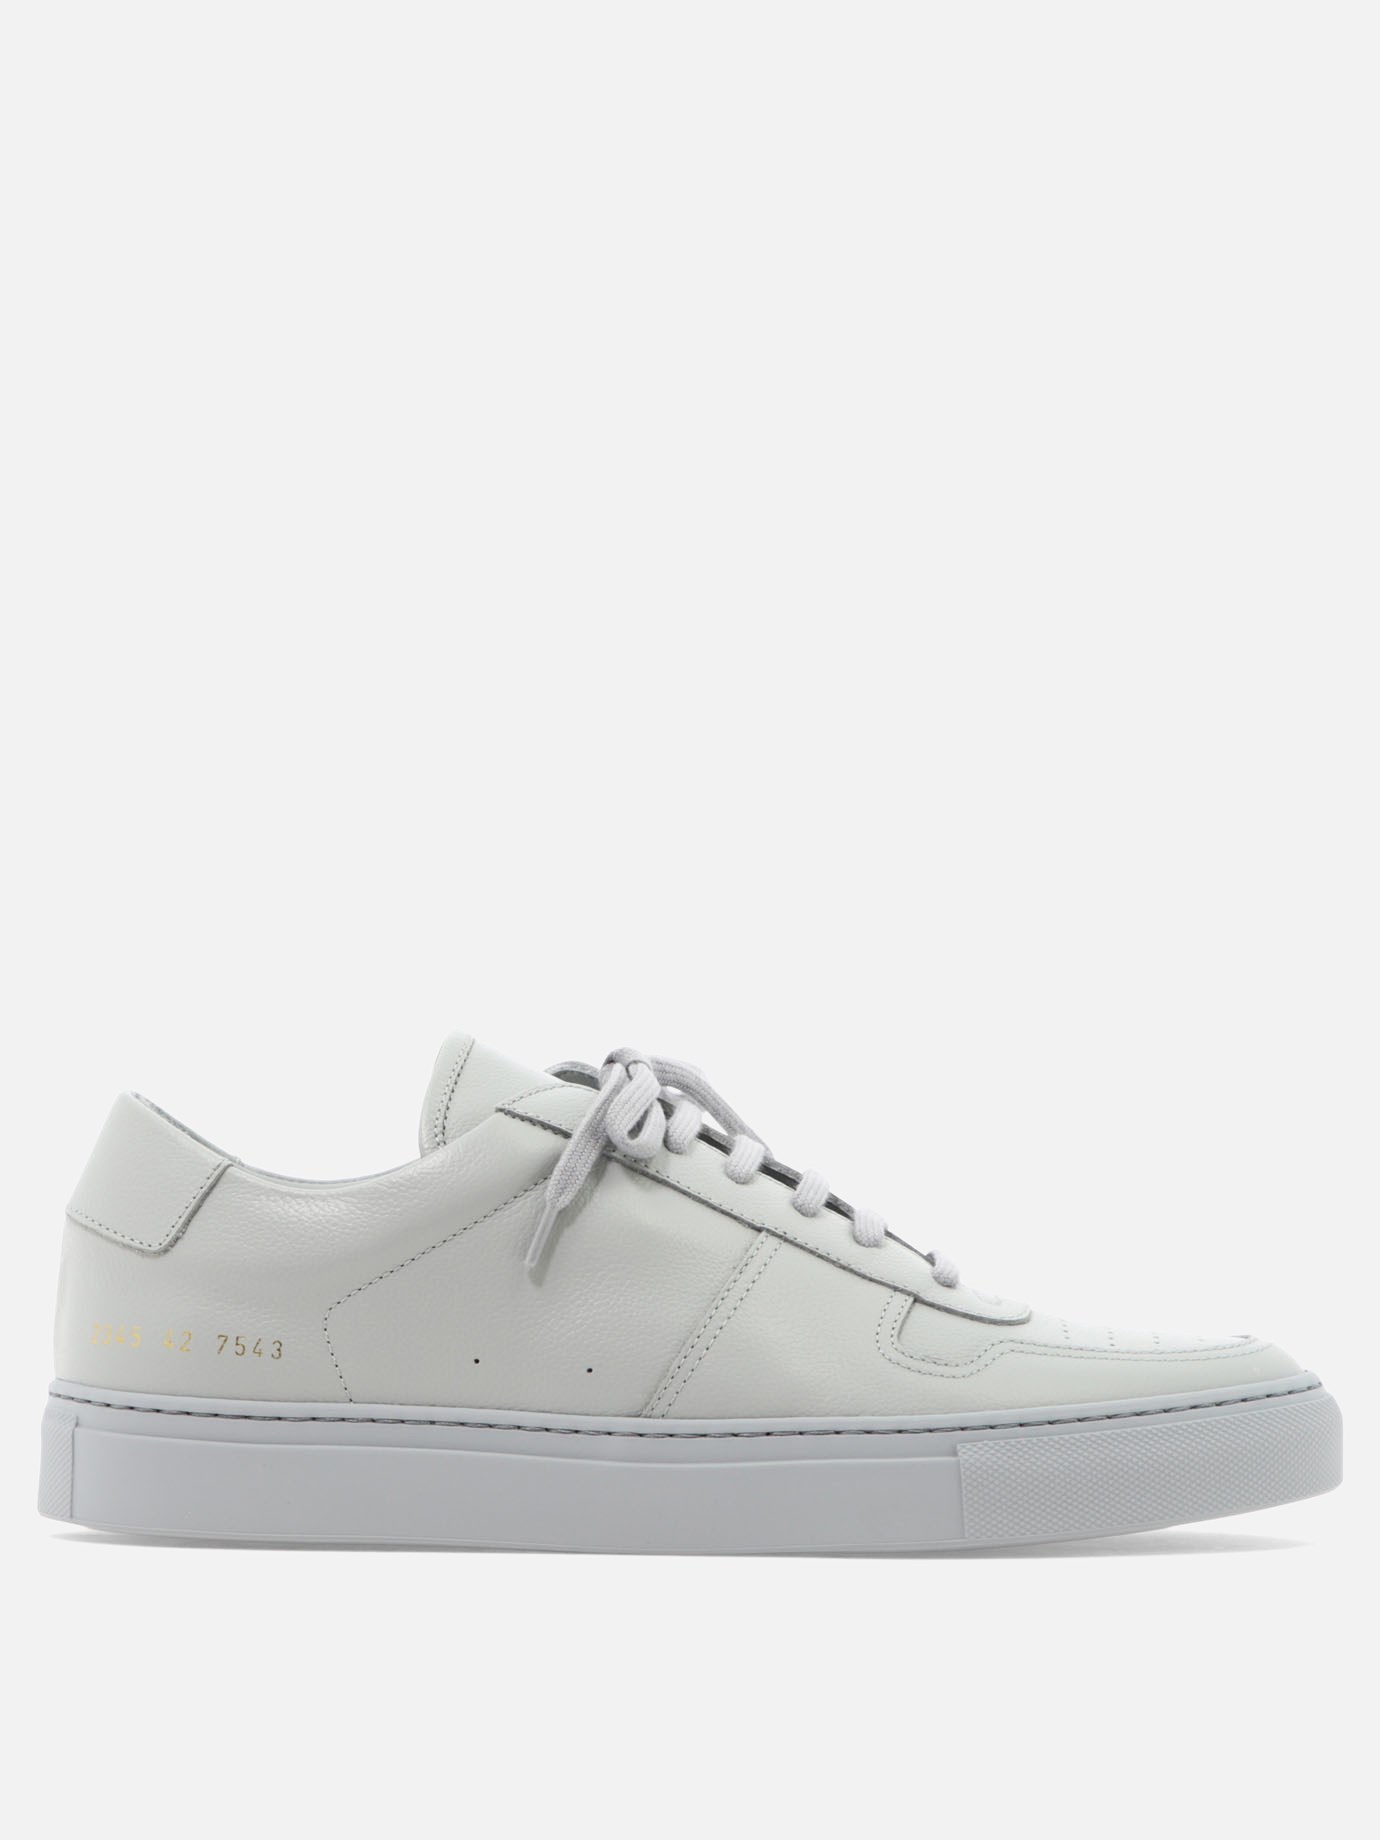  BBall Low Bumpy  sneakersby Common Projects - 3